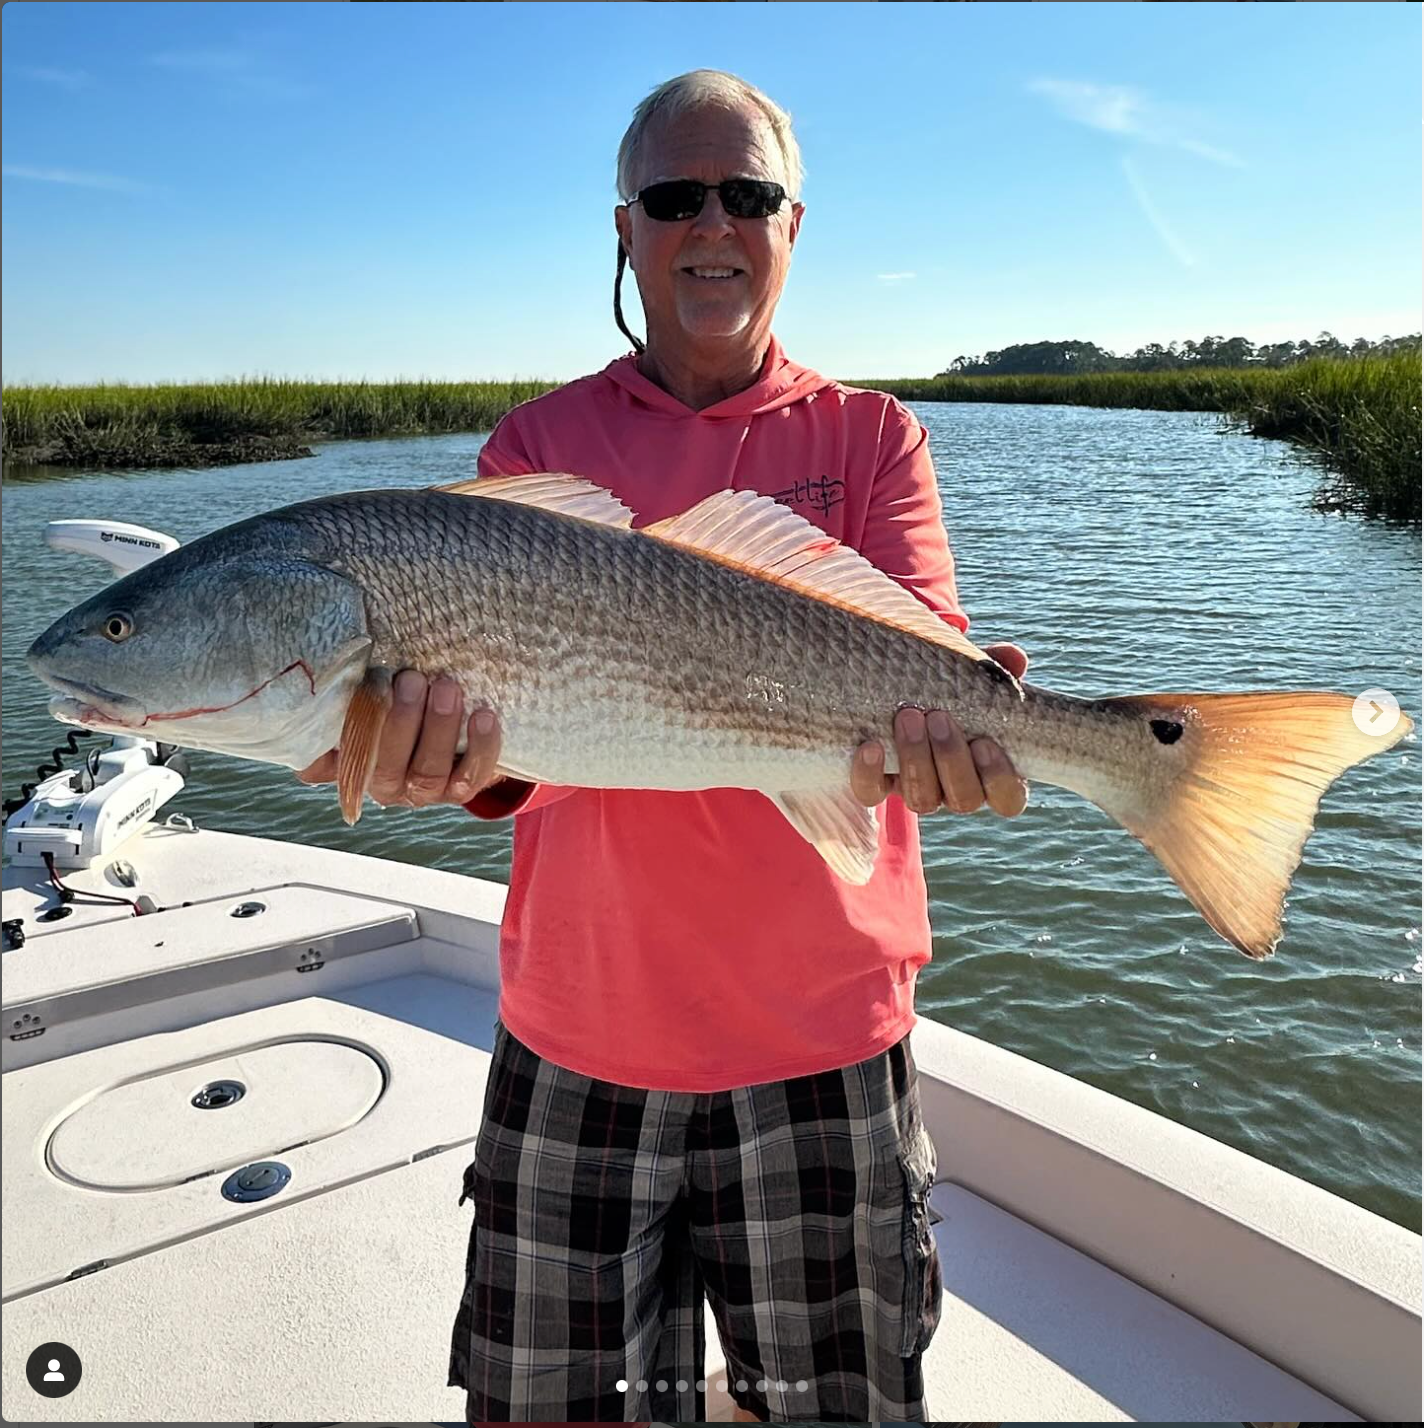 Fall is here and so are the redfish! The last few days have been exceptional for sure!